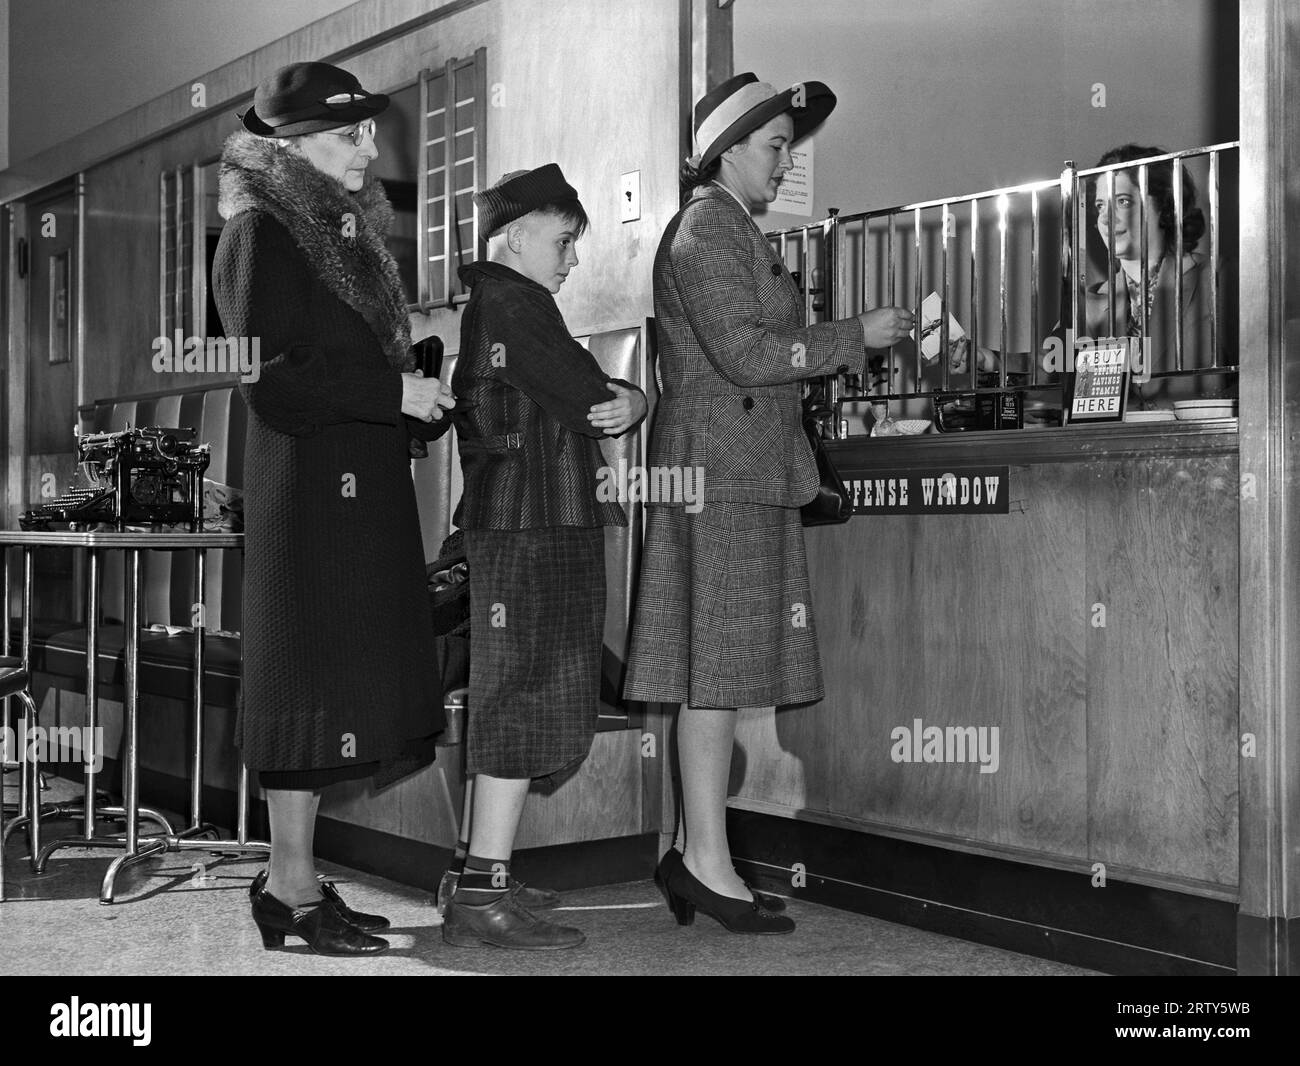 United States     1942 Women line up to purchase defense bonds during World War II. Original Title: “For insurance against the Axis, buy defense bonds and stamps. You can get them at your bank, post office, department store and from your newsboy.”  Photograph taken by Ann Rosener for the Office of Emergency Management Stock Photo